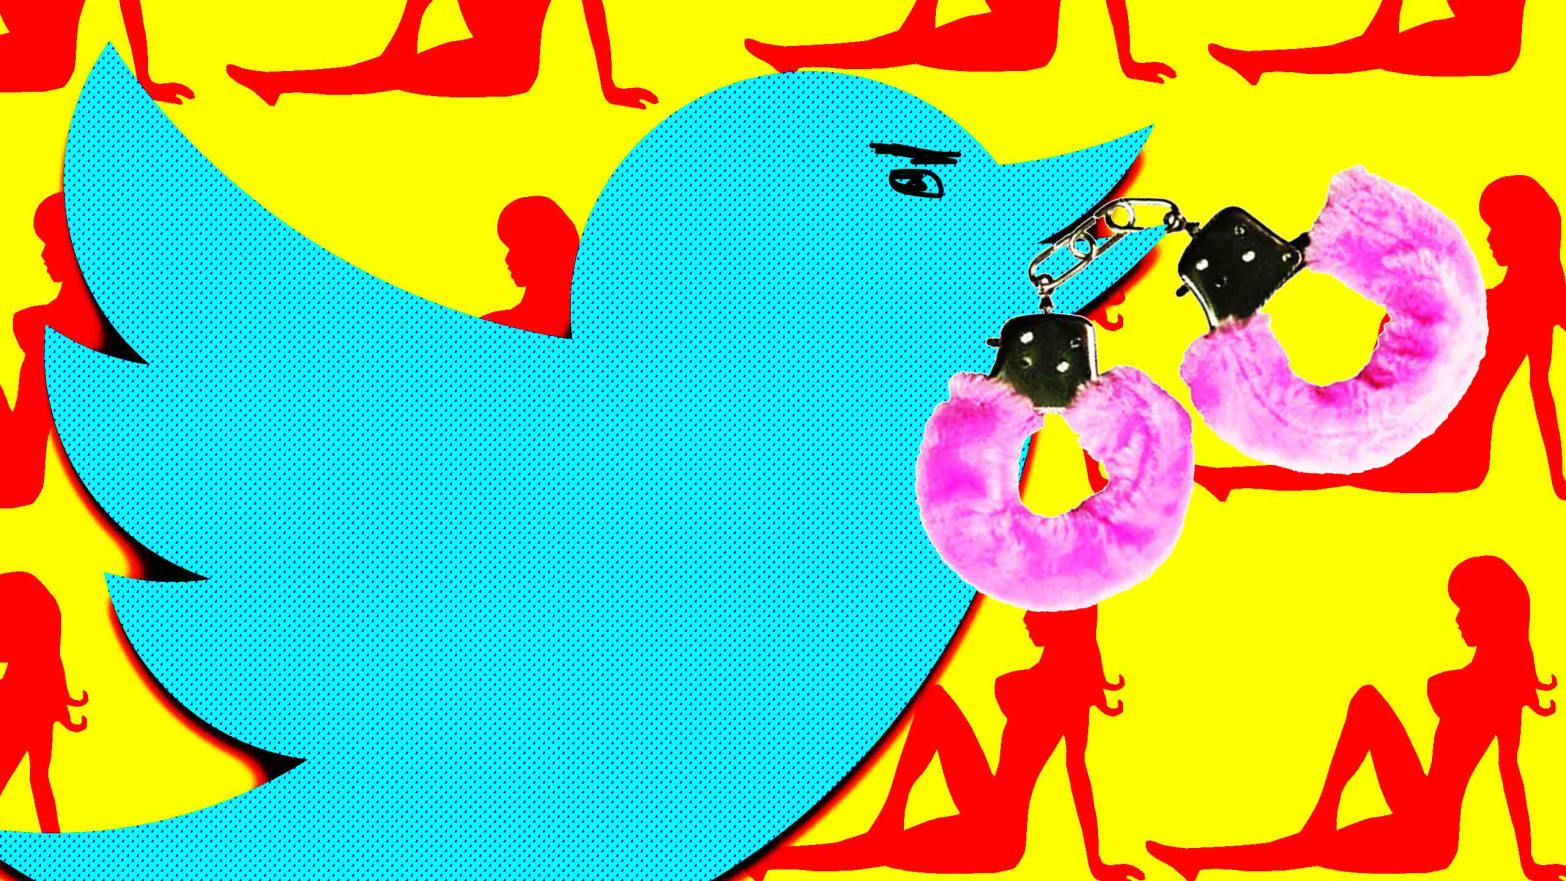 Beasty Porn Toon Art - Porn Stars Aren't Worried About That 'Twitter Ban' on Adult ...